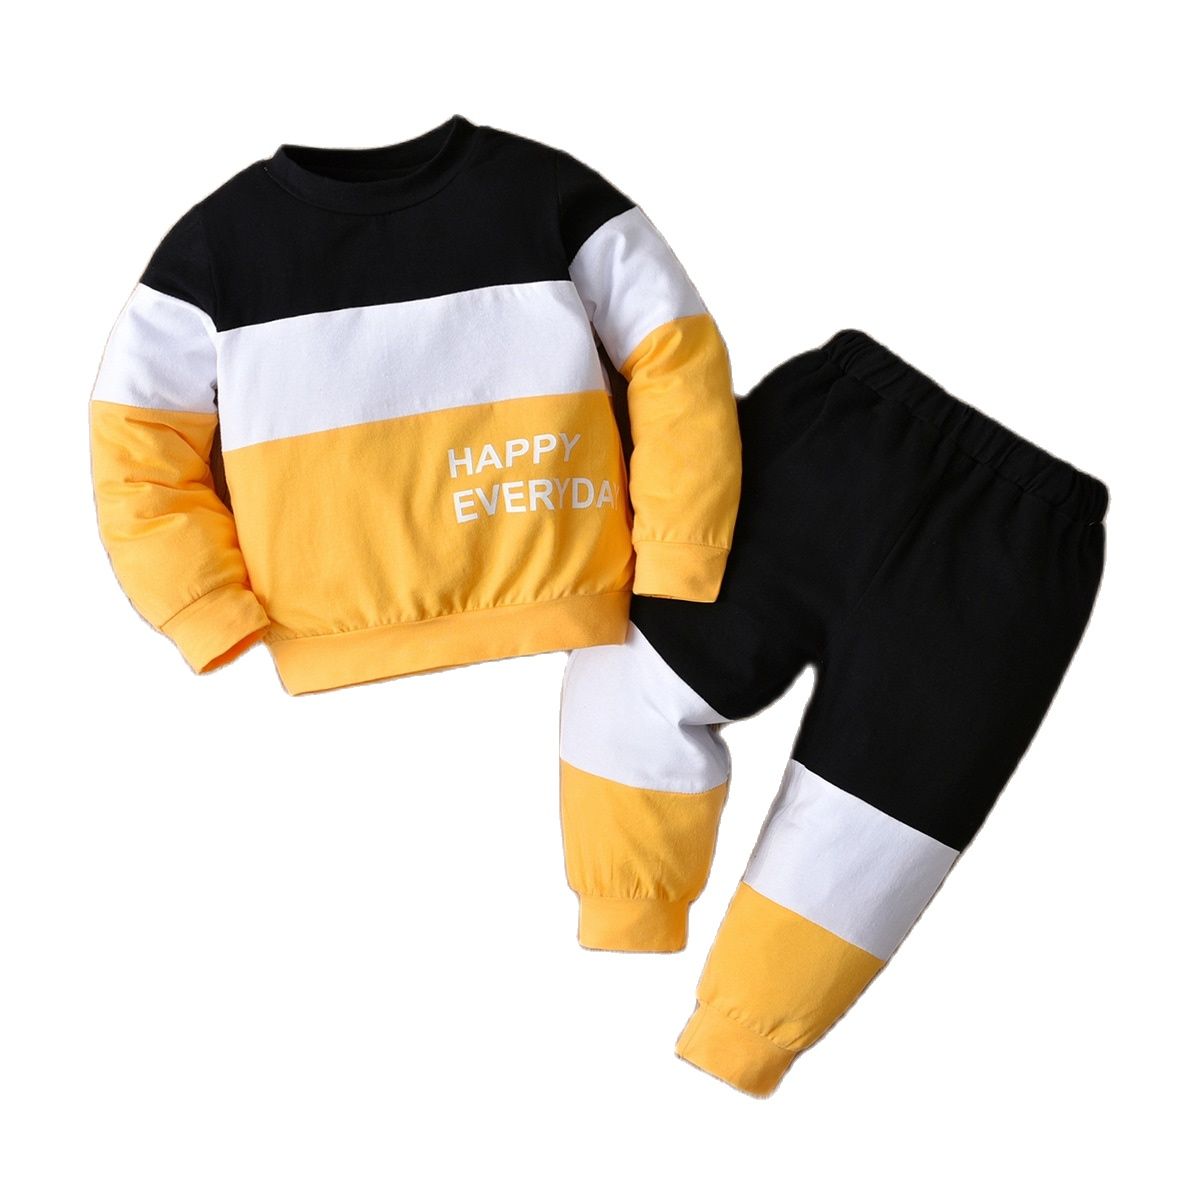 Spring-and-Autumn-Baby-Boys-Set-Round-Neck-Long-Sleeve-Panel-Top-Pants-68-92-2